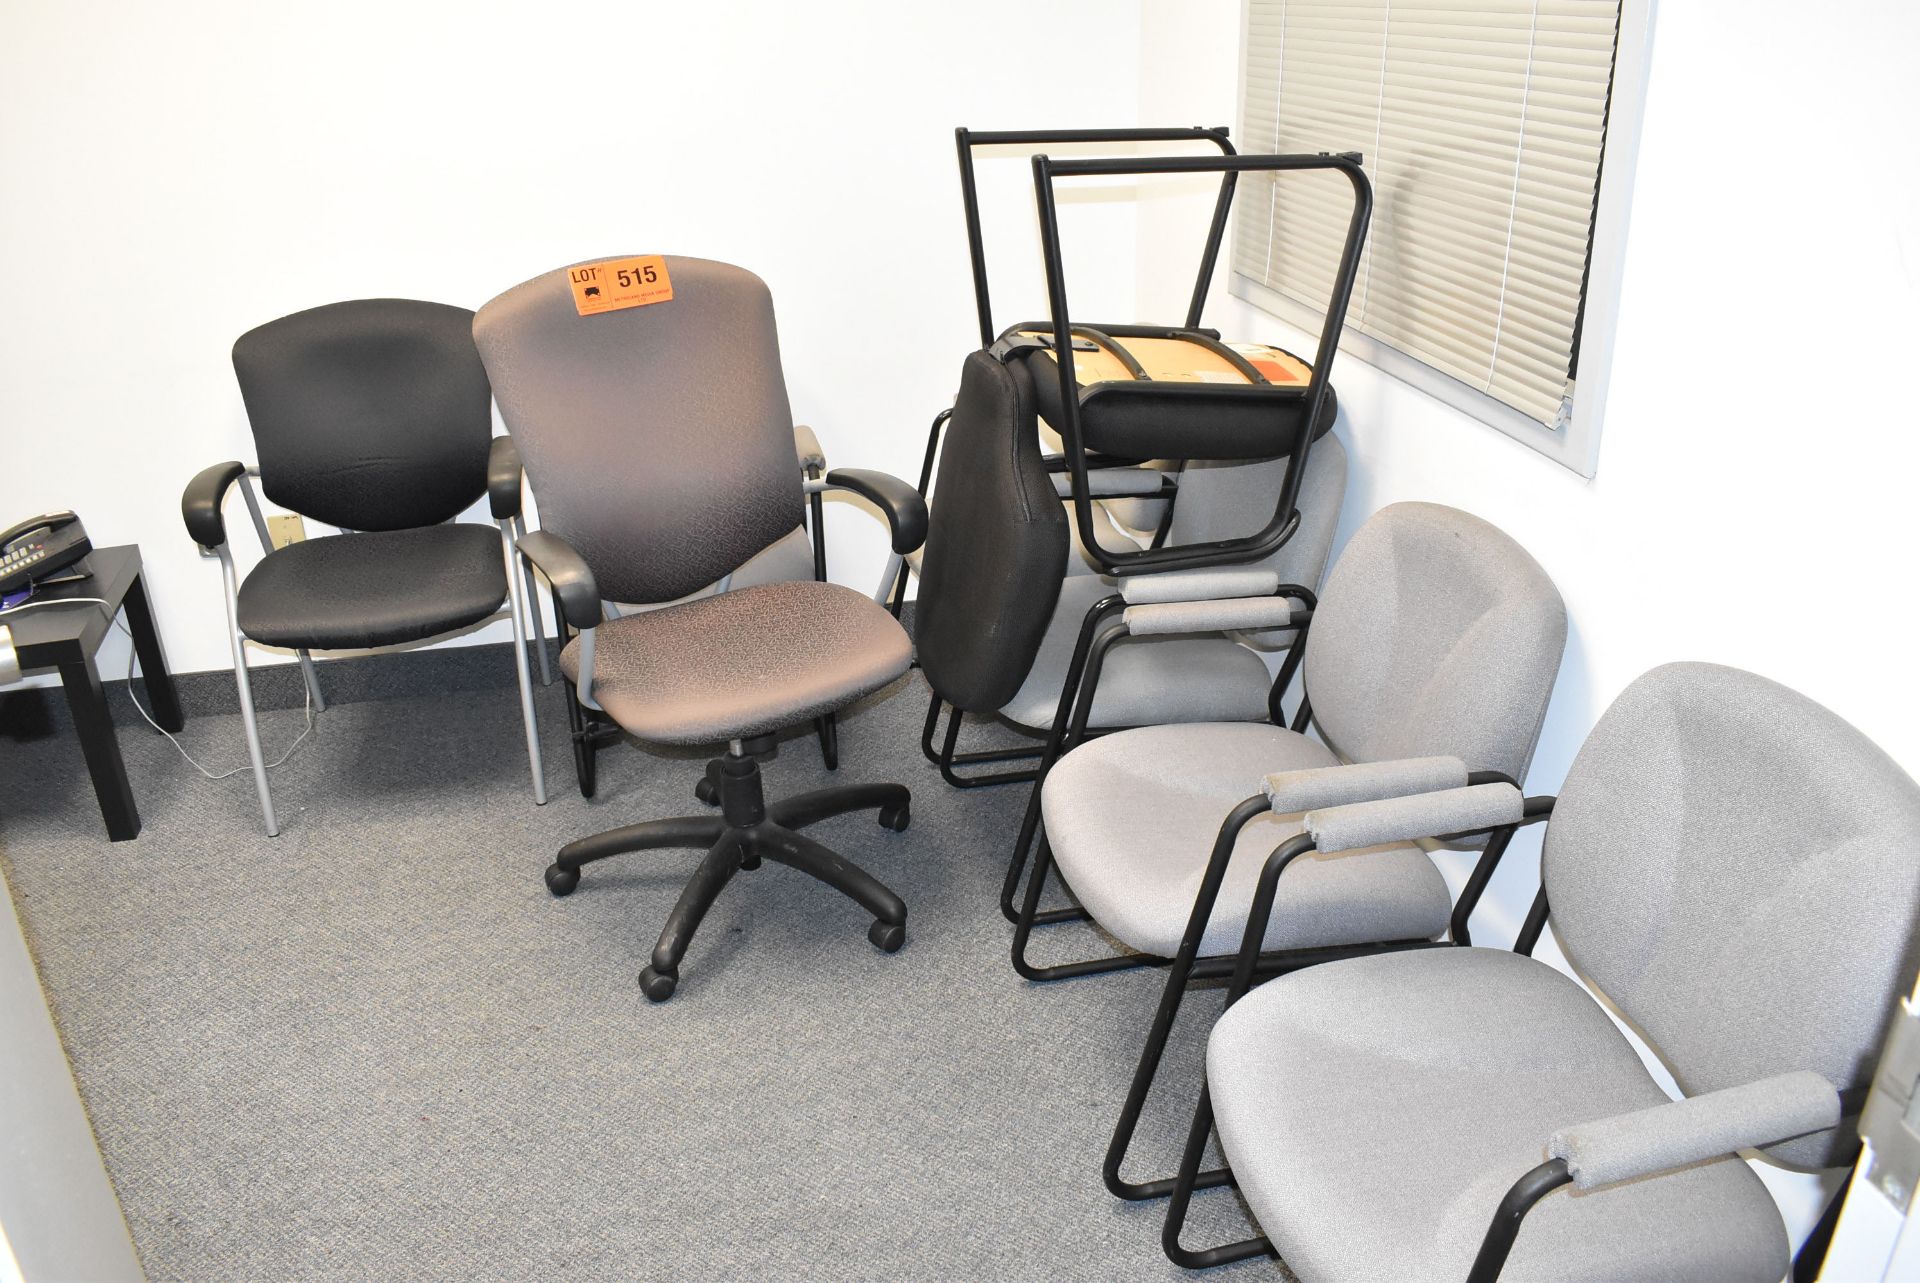 LOT/ CONTENTS OF ROOM CONSISTING OF COUCH, ARMCHAIR, END TABLE, OFFICE CHAIR & (7) RECEPTION CHAIRS